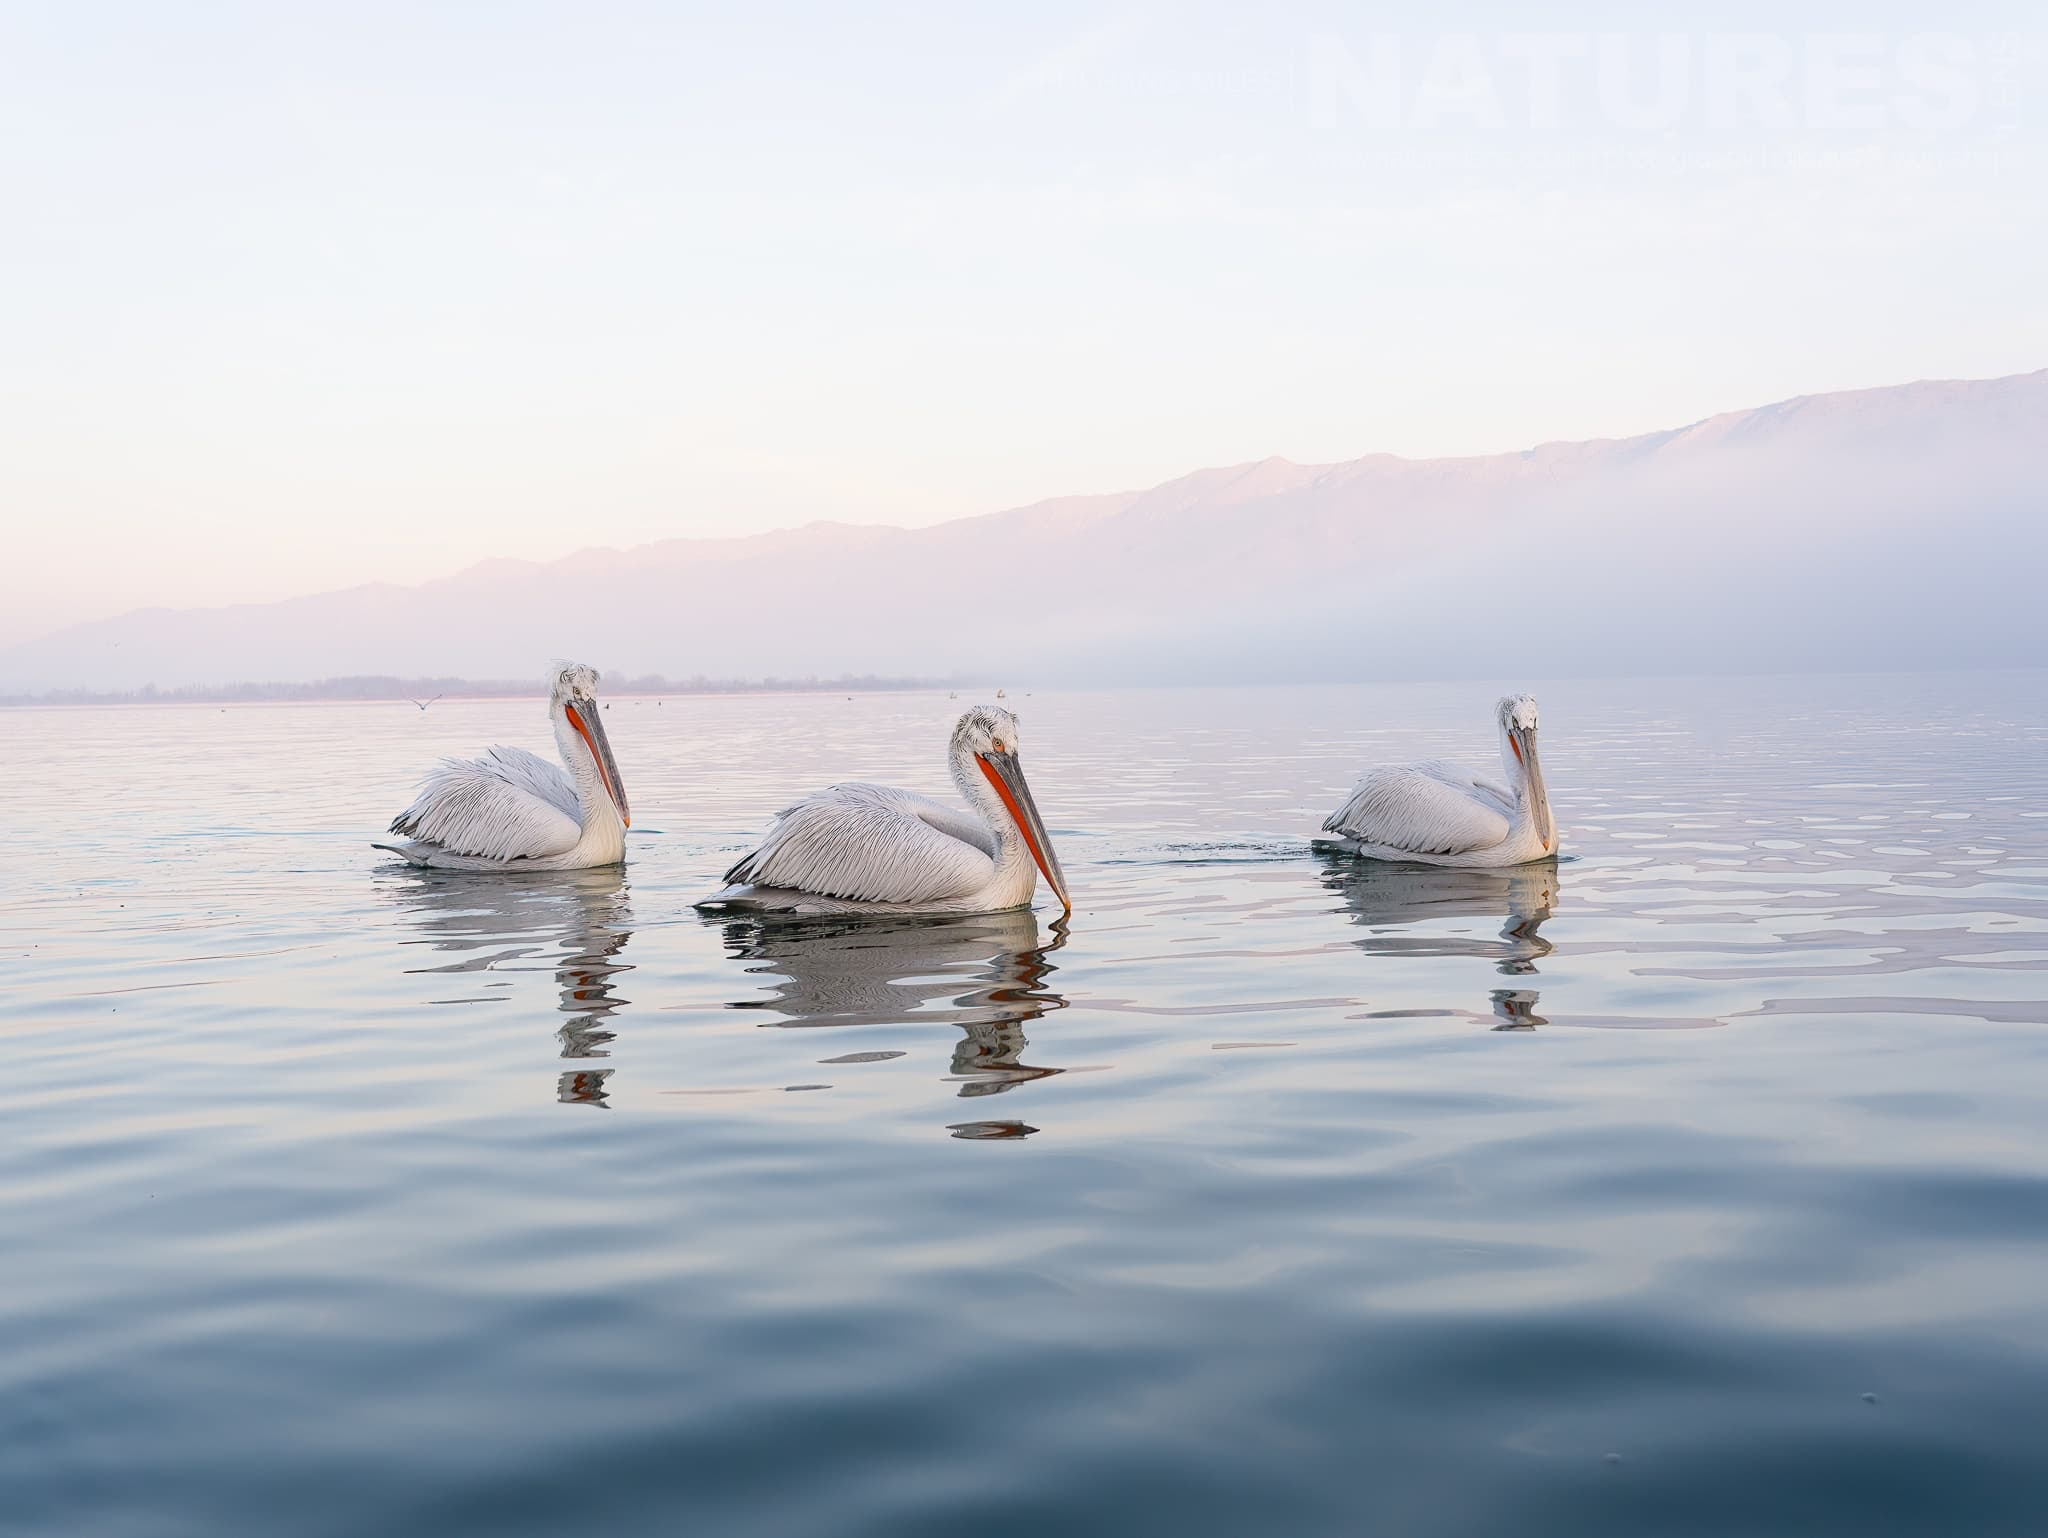 A Trio Of The Pelicans Of Lake Kerkini Drift Alongisde The Boat On The Waters Of The Lake Photographed During A Natureslens Pelicans Of Lake Kerkini Photography Holiday